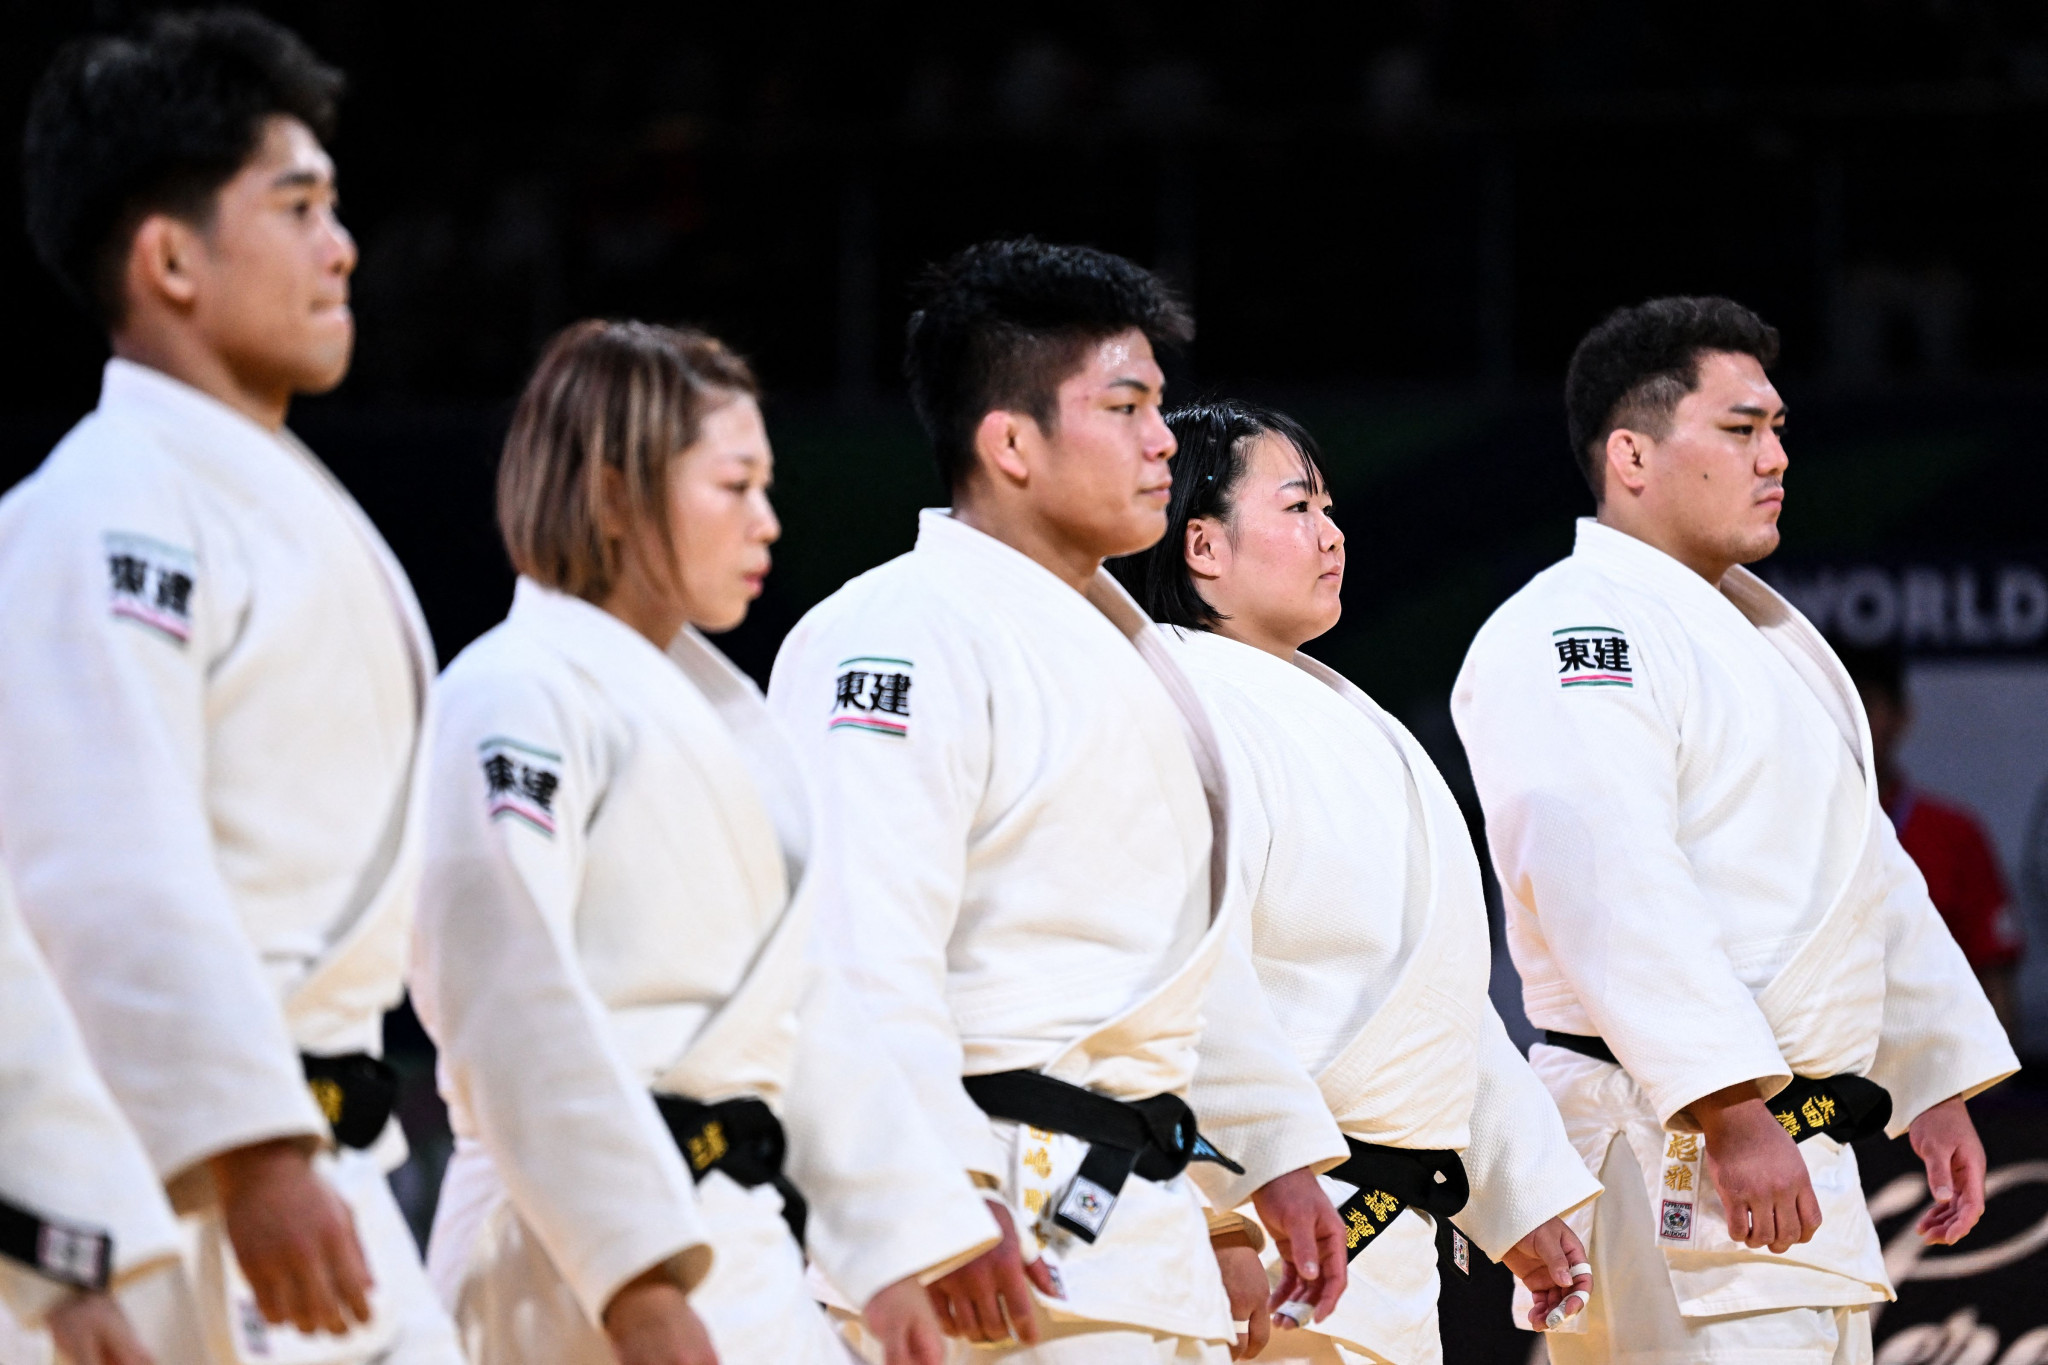 Mixed team tournament at World Judo Championships prompts historic results